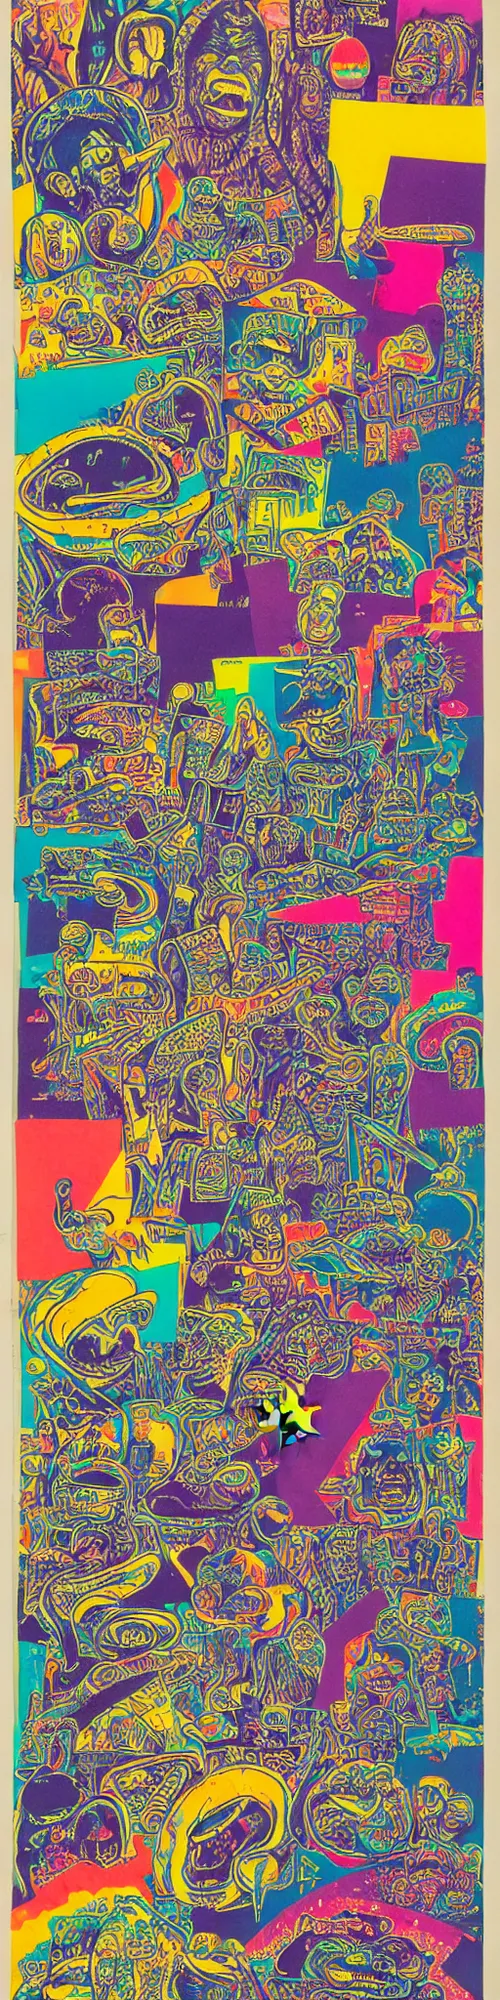 Prompt: stack of 1 9 9 0 s rap all stars, melting, graffiti monster, wild style, victor moscoso, bubble letters, magazine collage, cubism, muted but vibrant colors, muted rainbow tubing, dali, r crumb, hr giger, basil wolverton, afro tech, aztec patterns